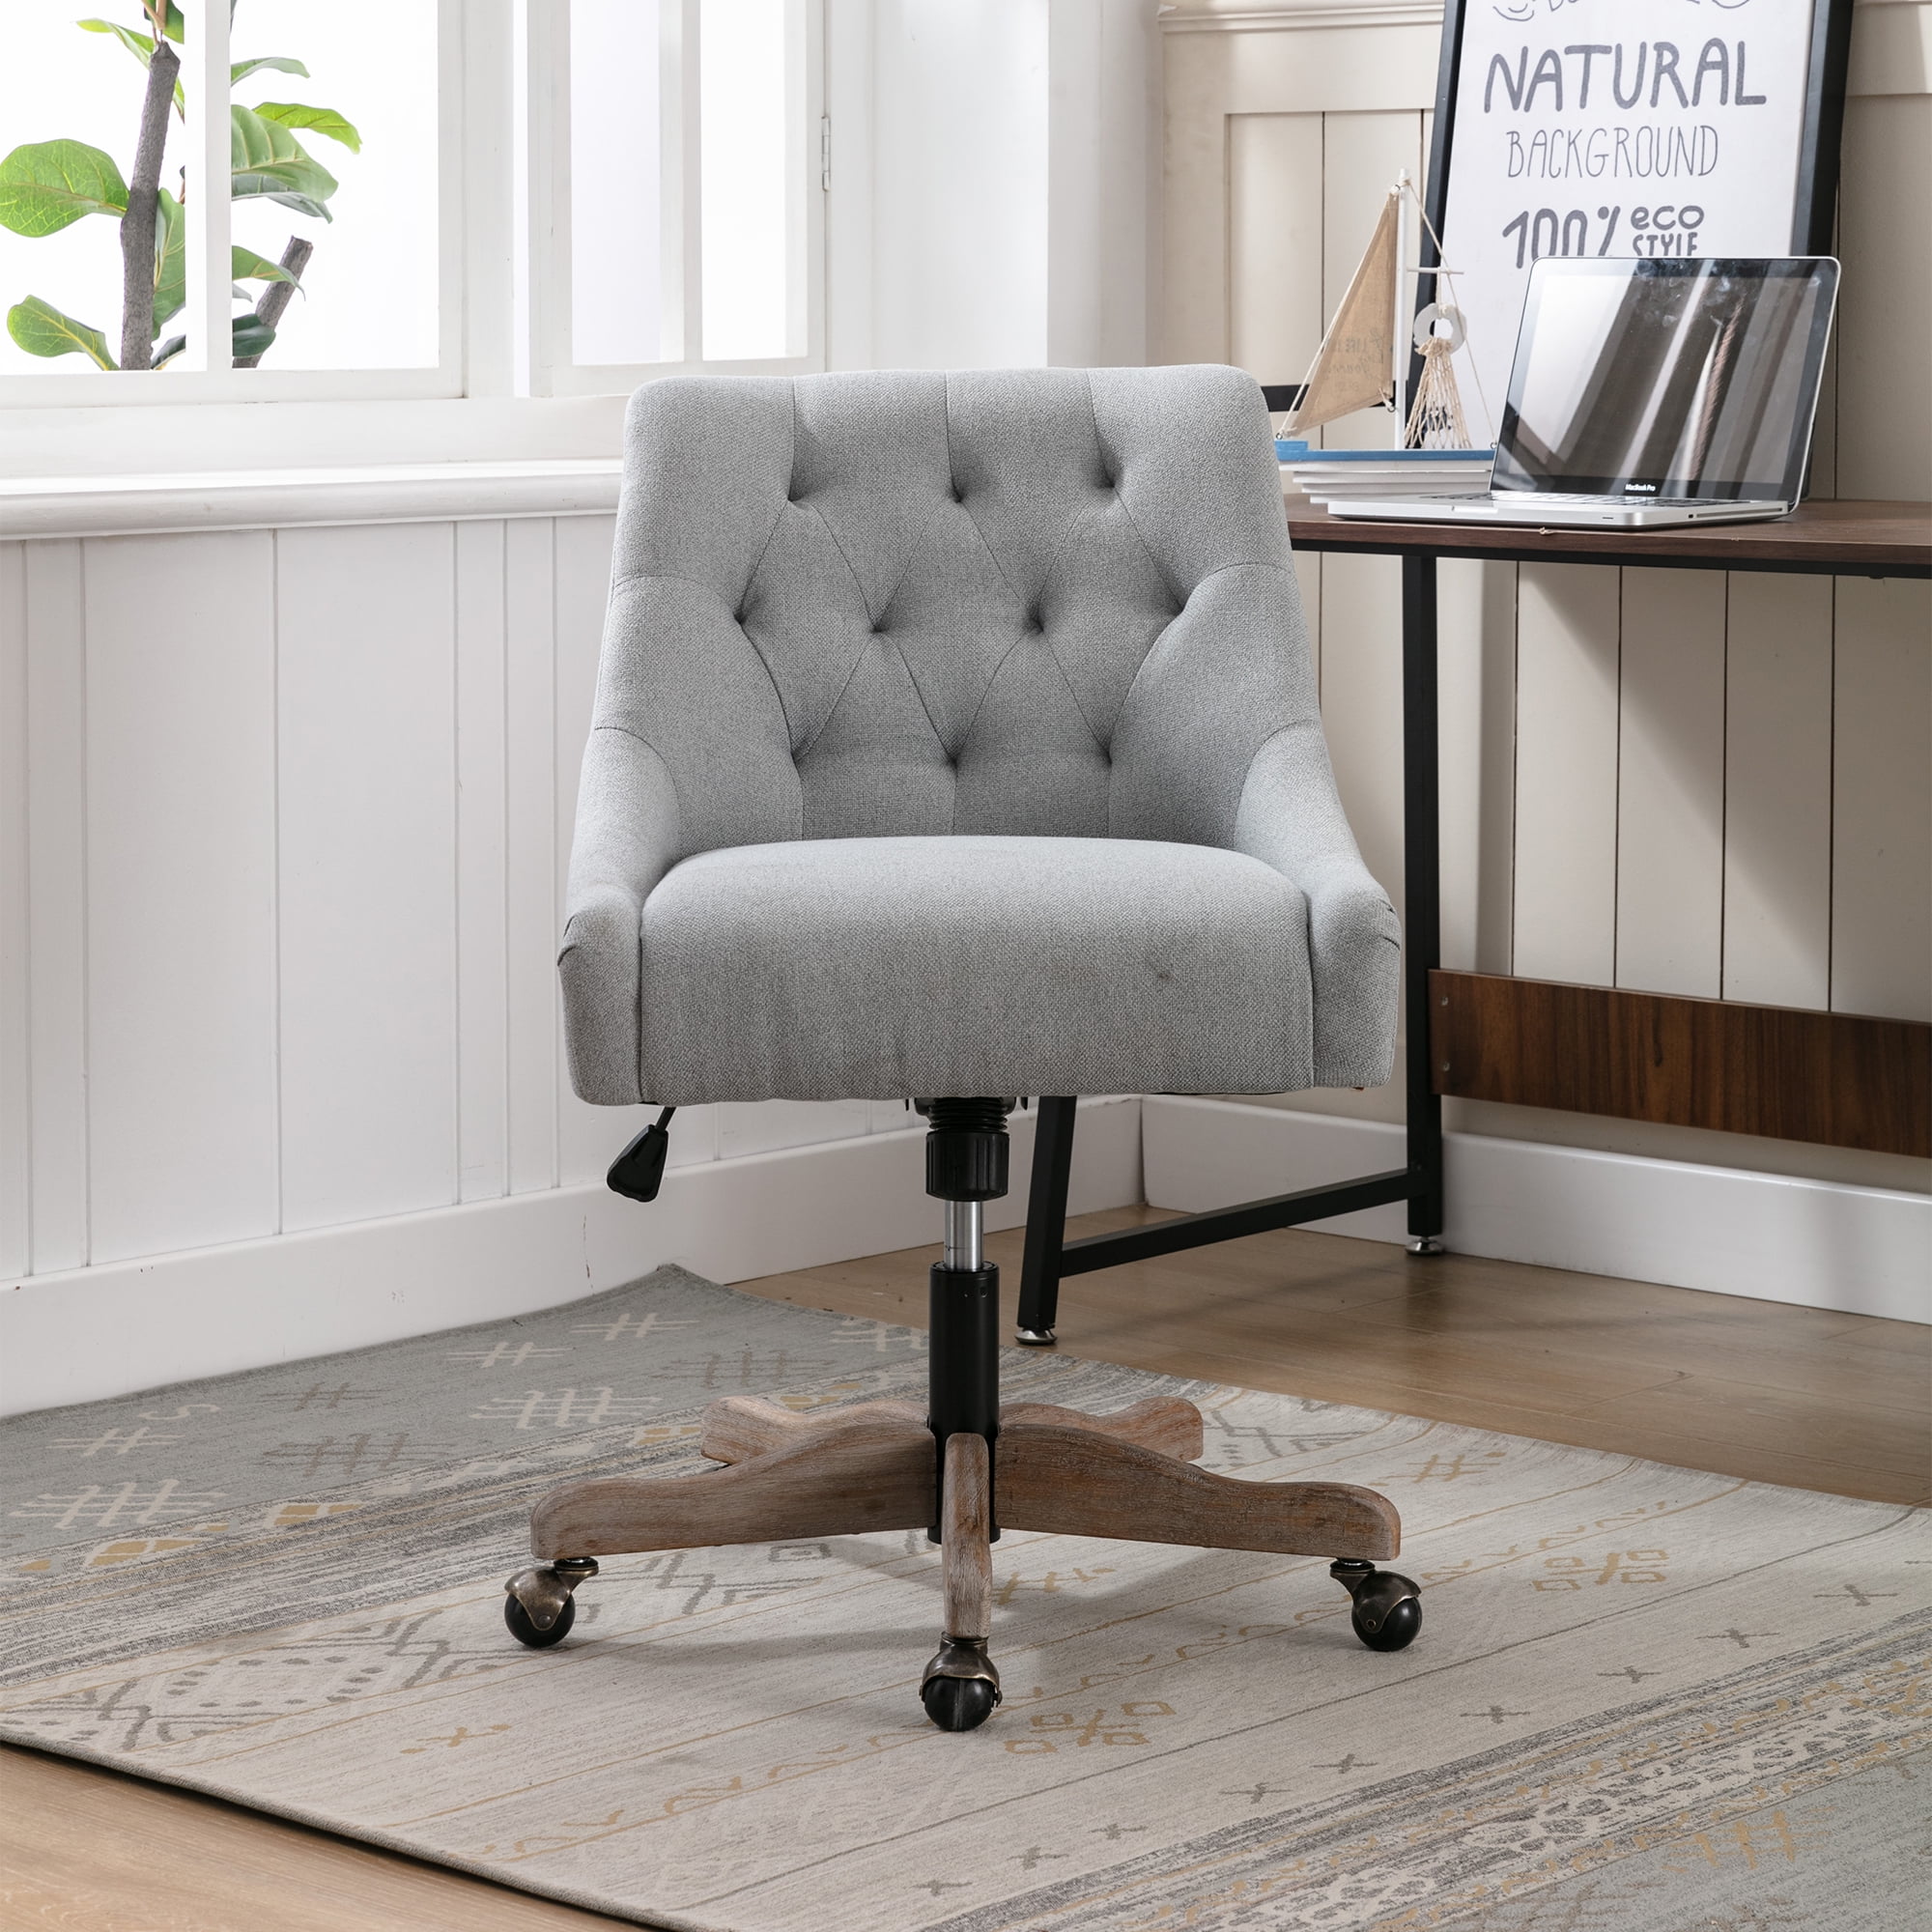 Details about   Steelcase Chair Model Jack Color Grey 